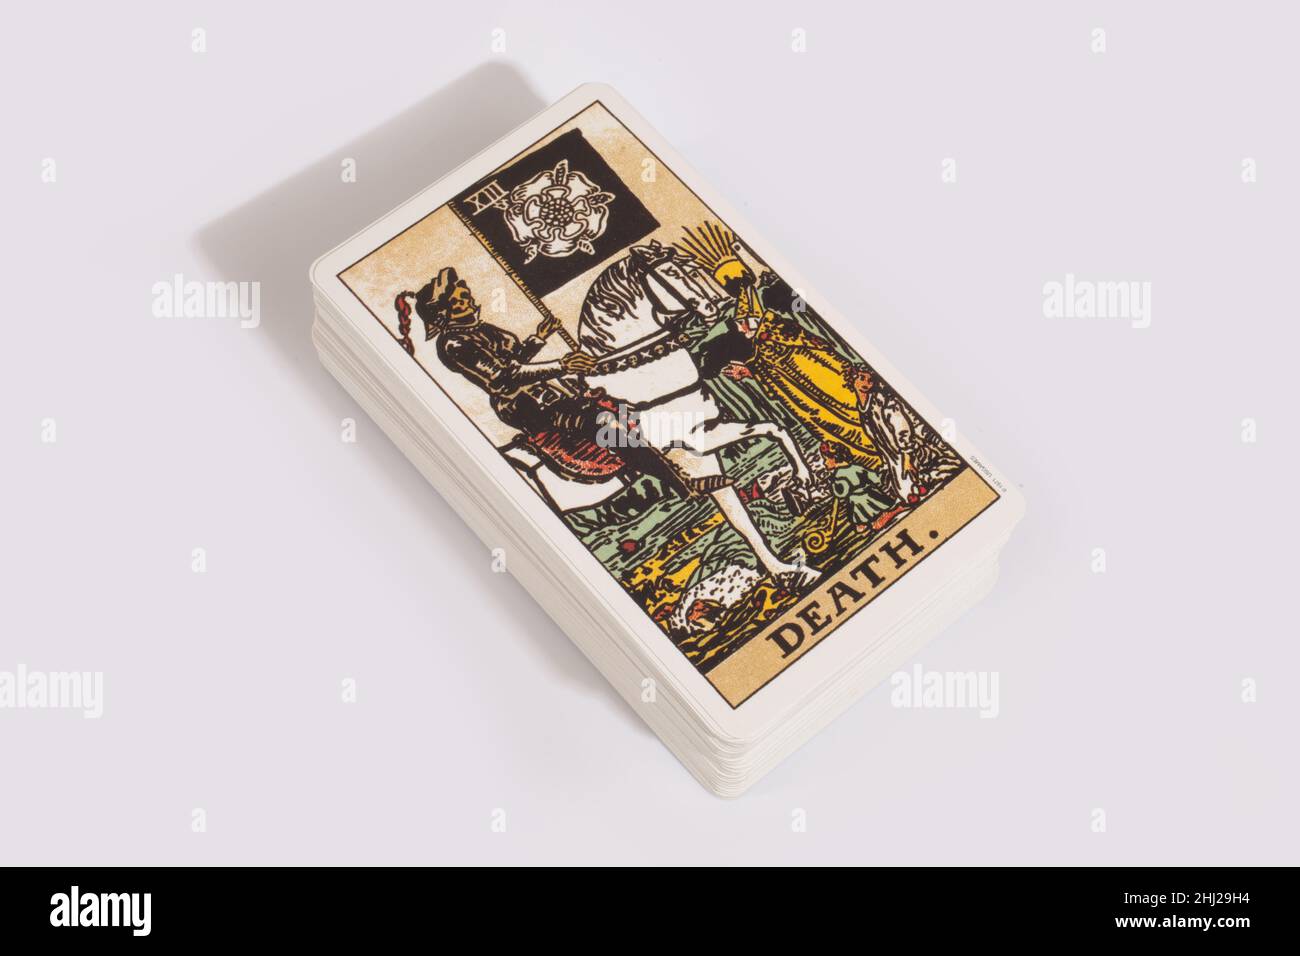 The Death card from a traditional tarot pack Stock Photo